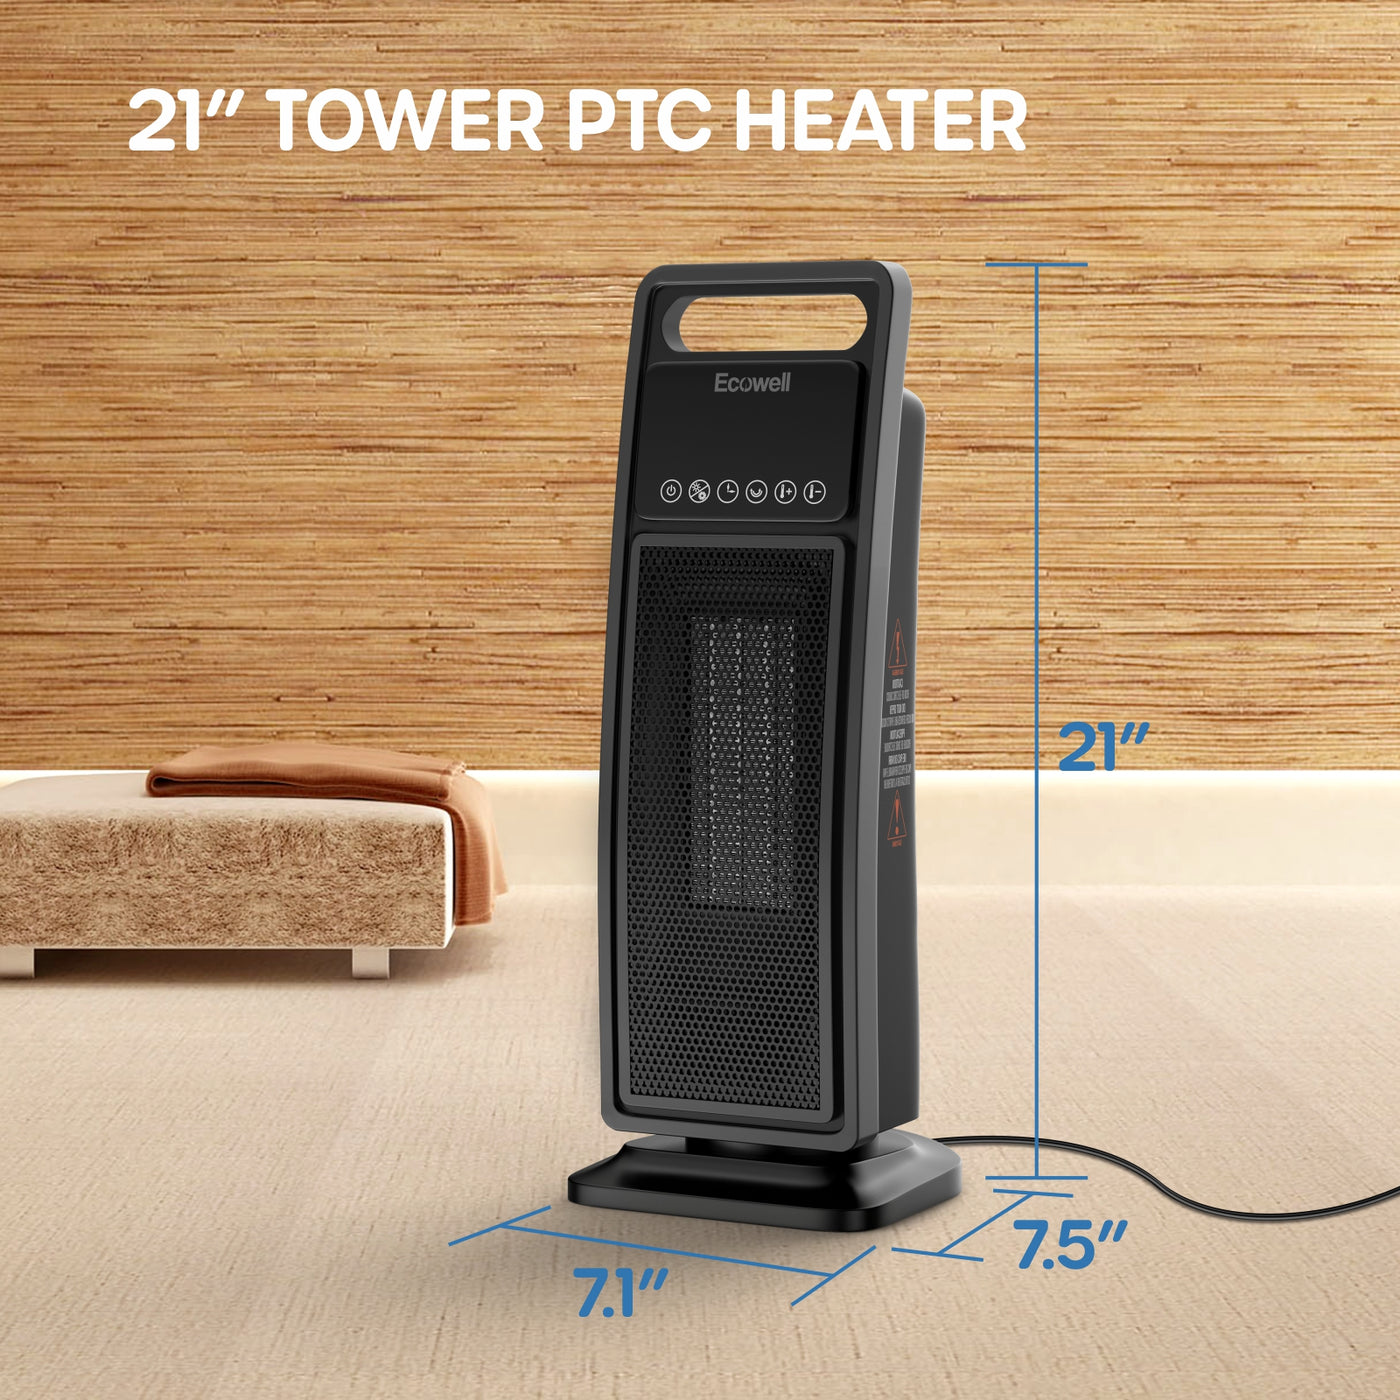 ECOWELL- 21" Tower Electric Heater W/ Remote